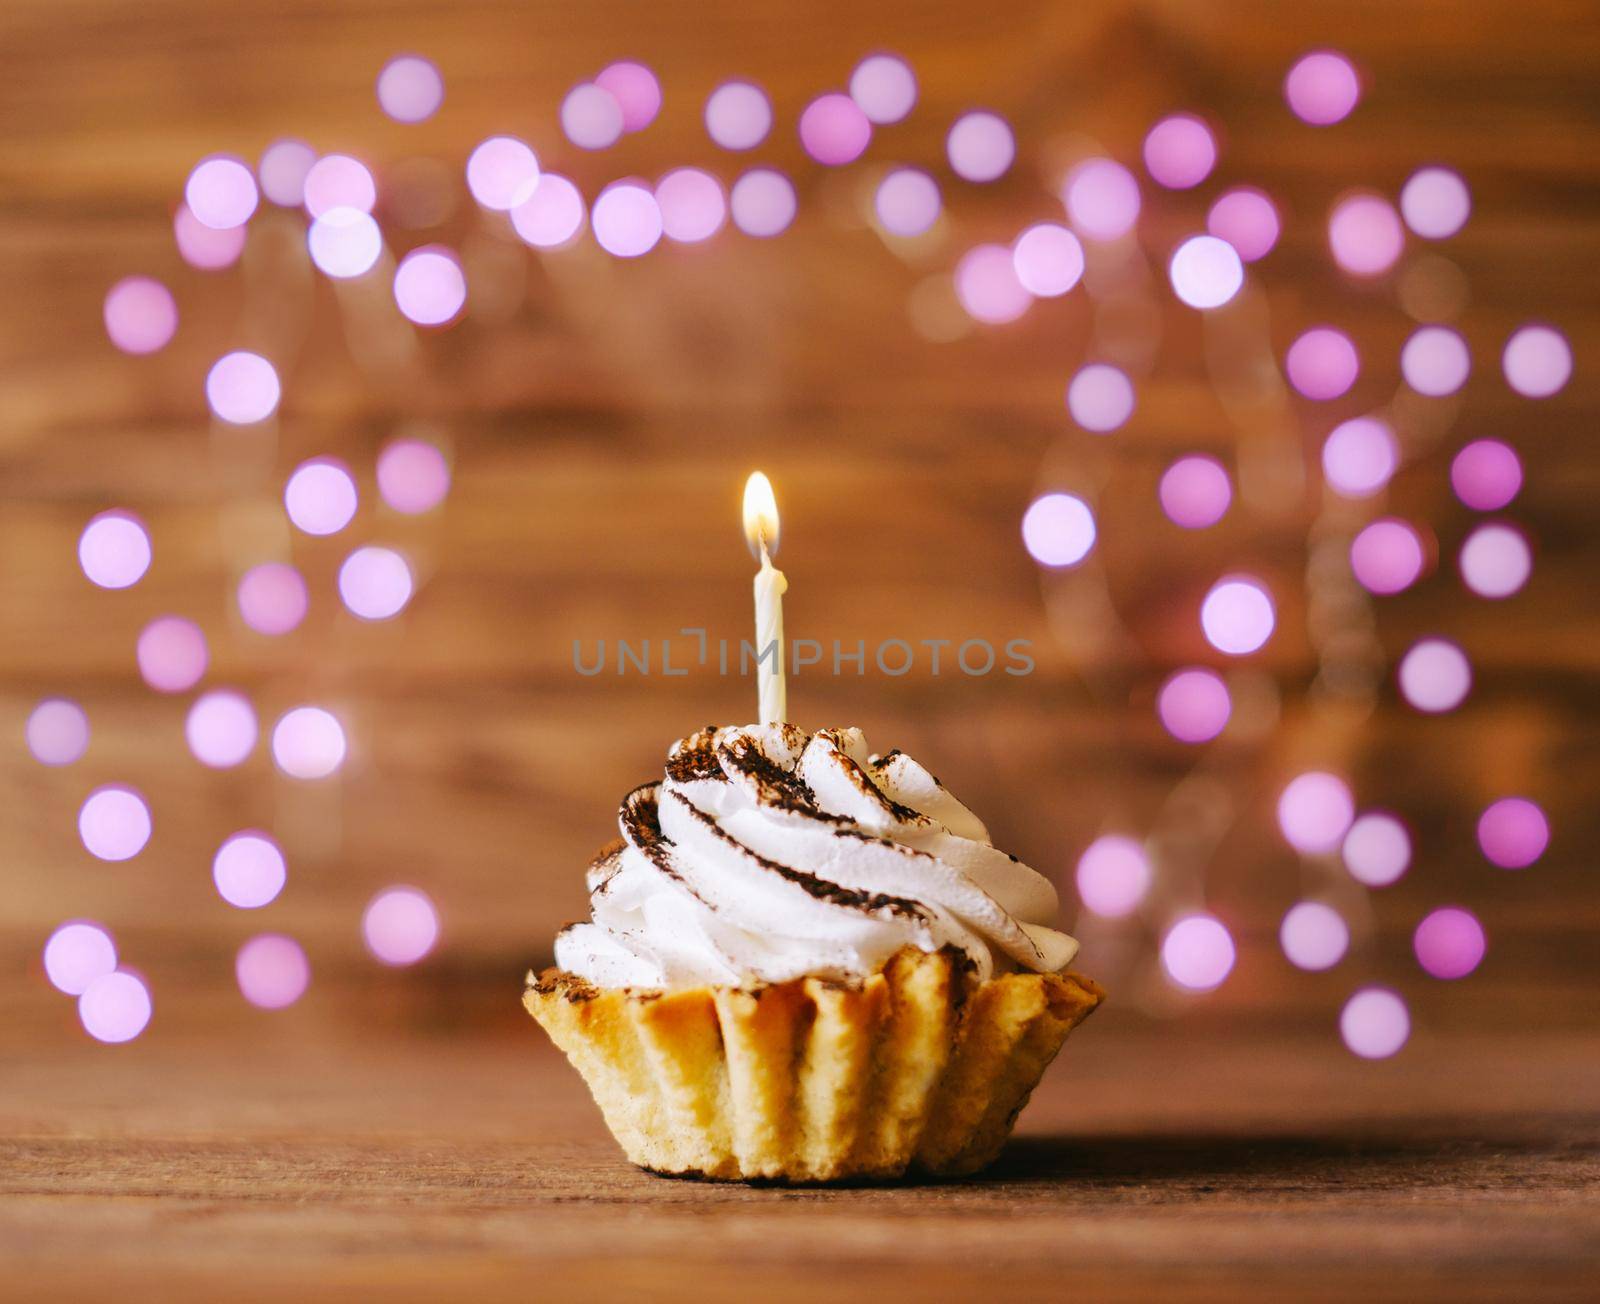 Birthday cream cupcake with candle on a wooden table against blurred lights.